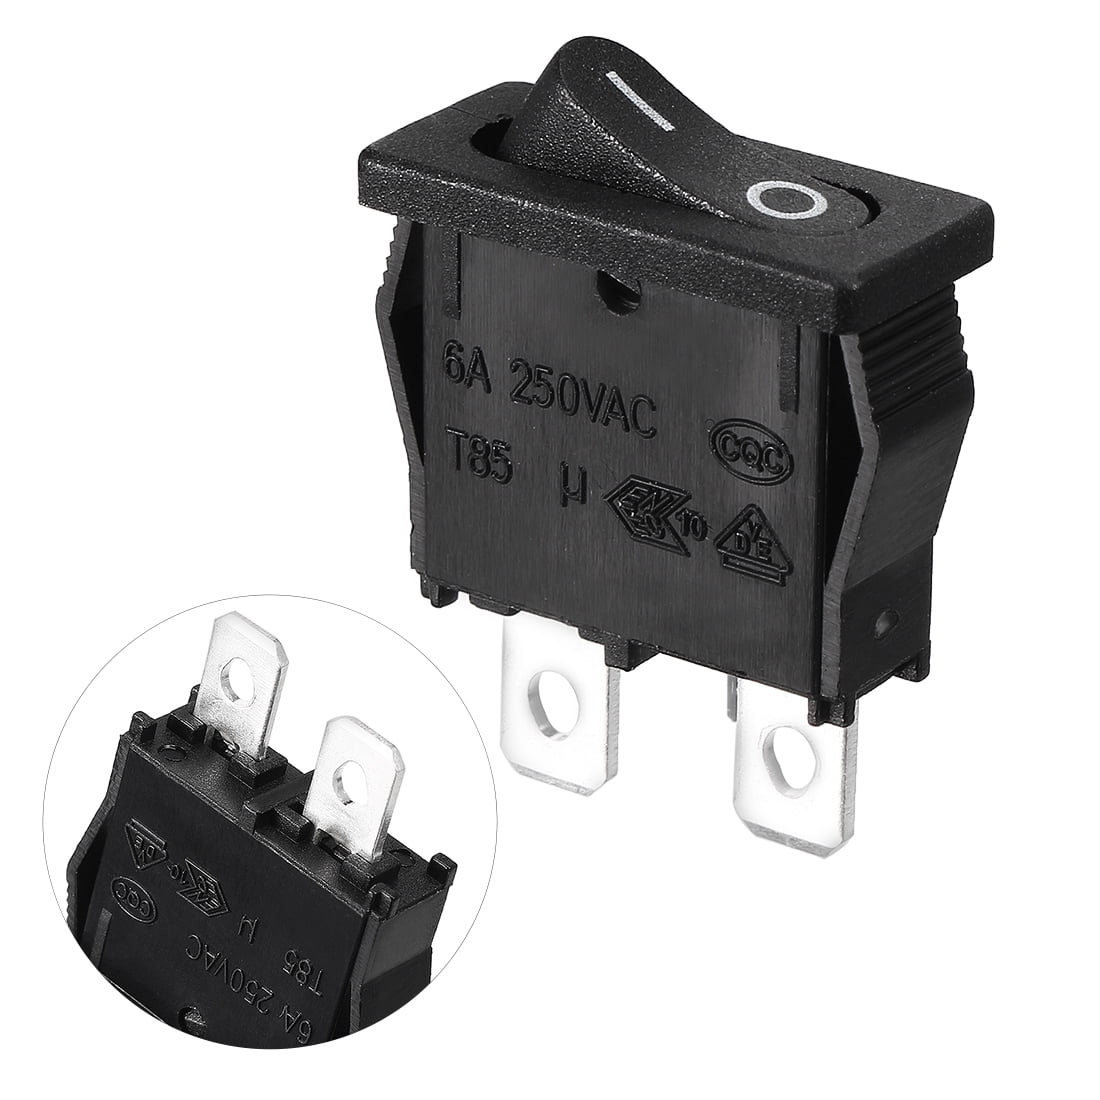 10pcs Snap-in On/Off Rocker Switch 2 Pin 6A 250VAC 10A 120VAC Switch 